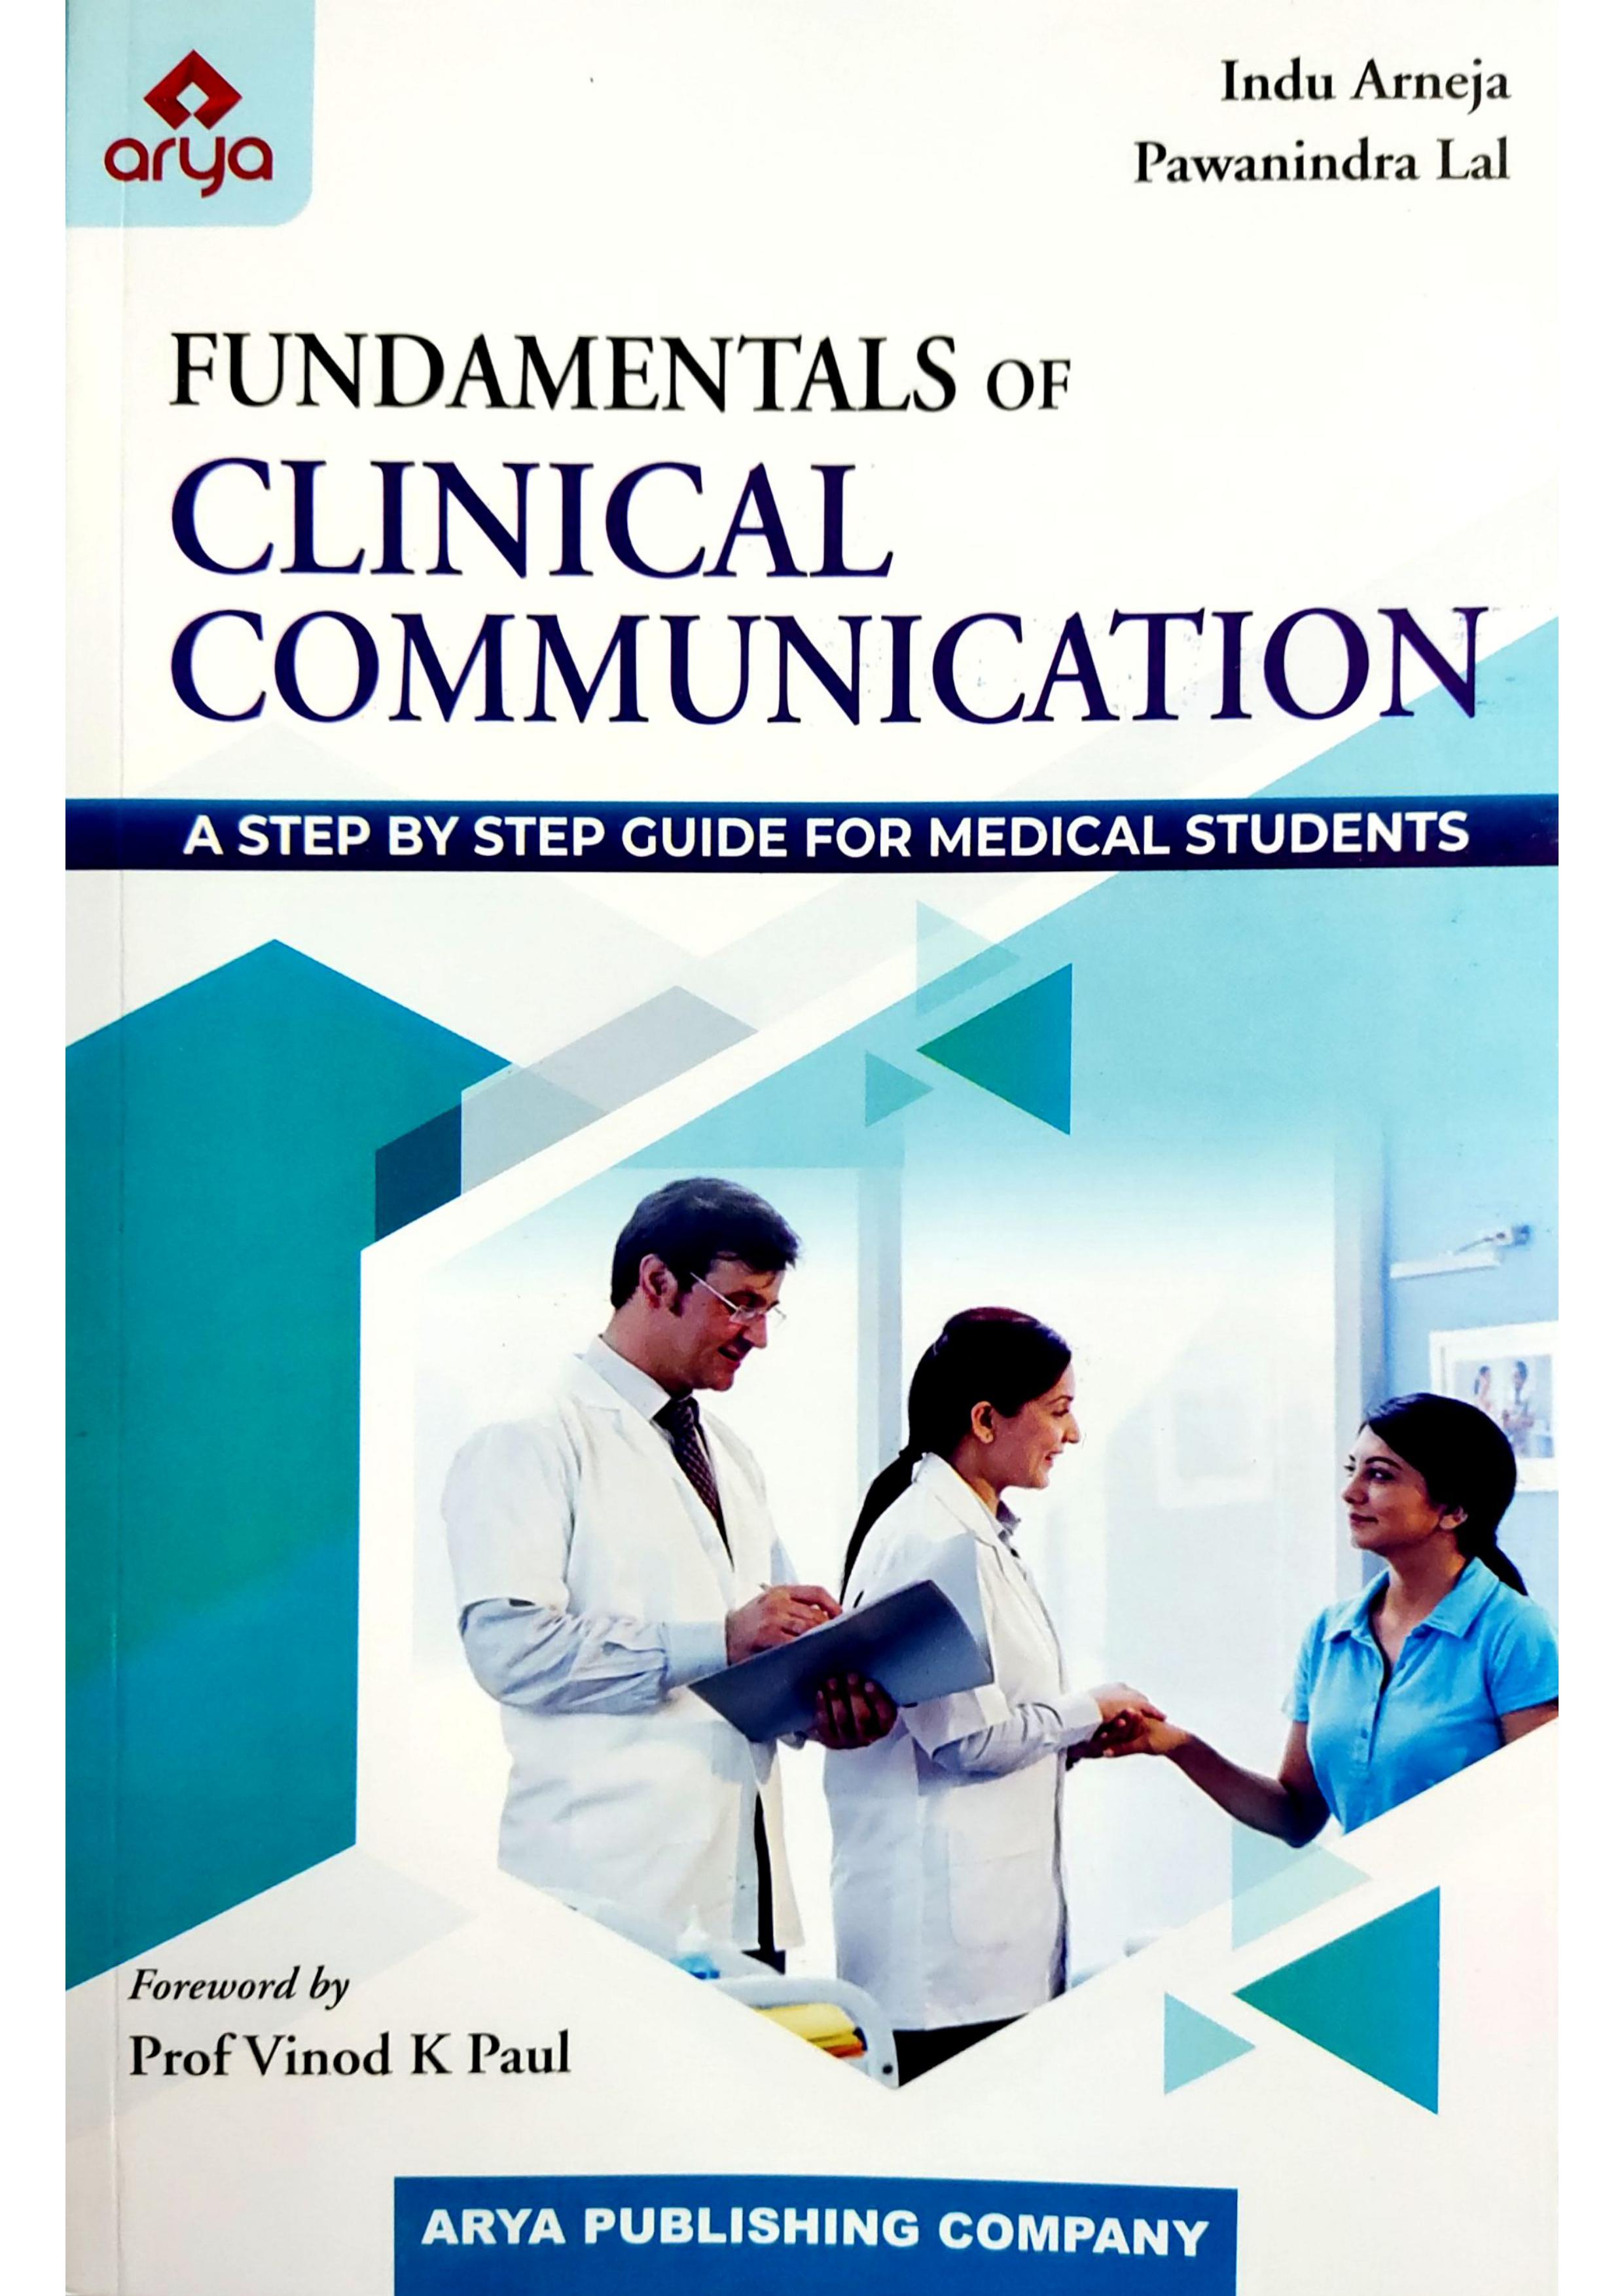 Fundamentals of Clinical Communication - A step by step guide for medical students